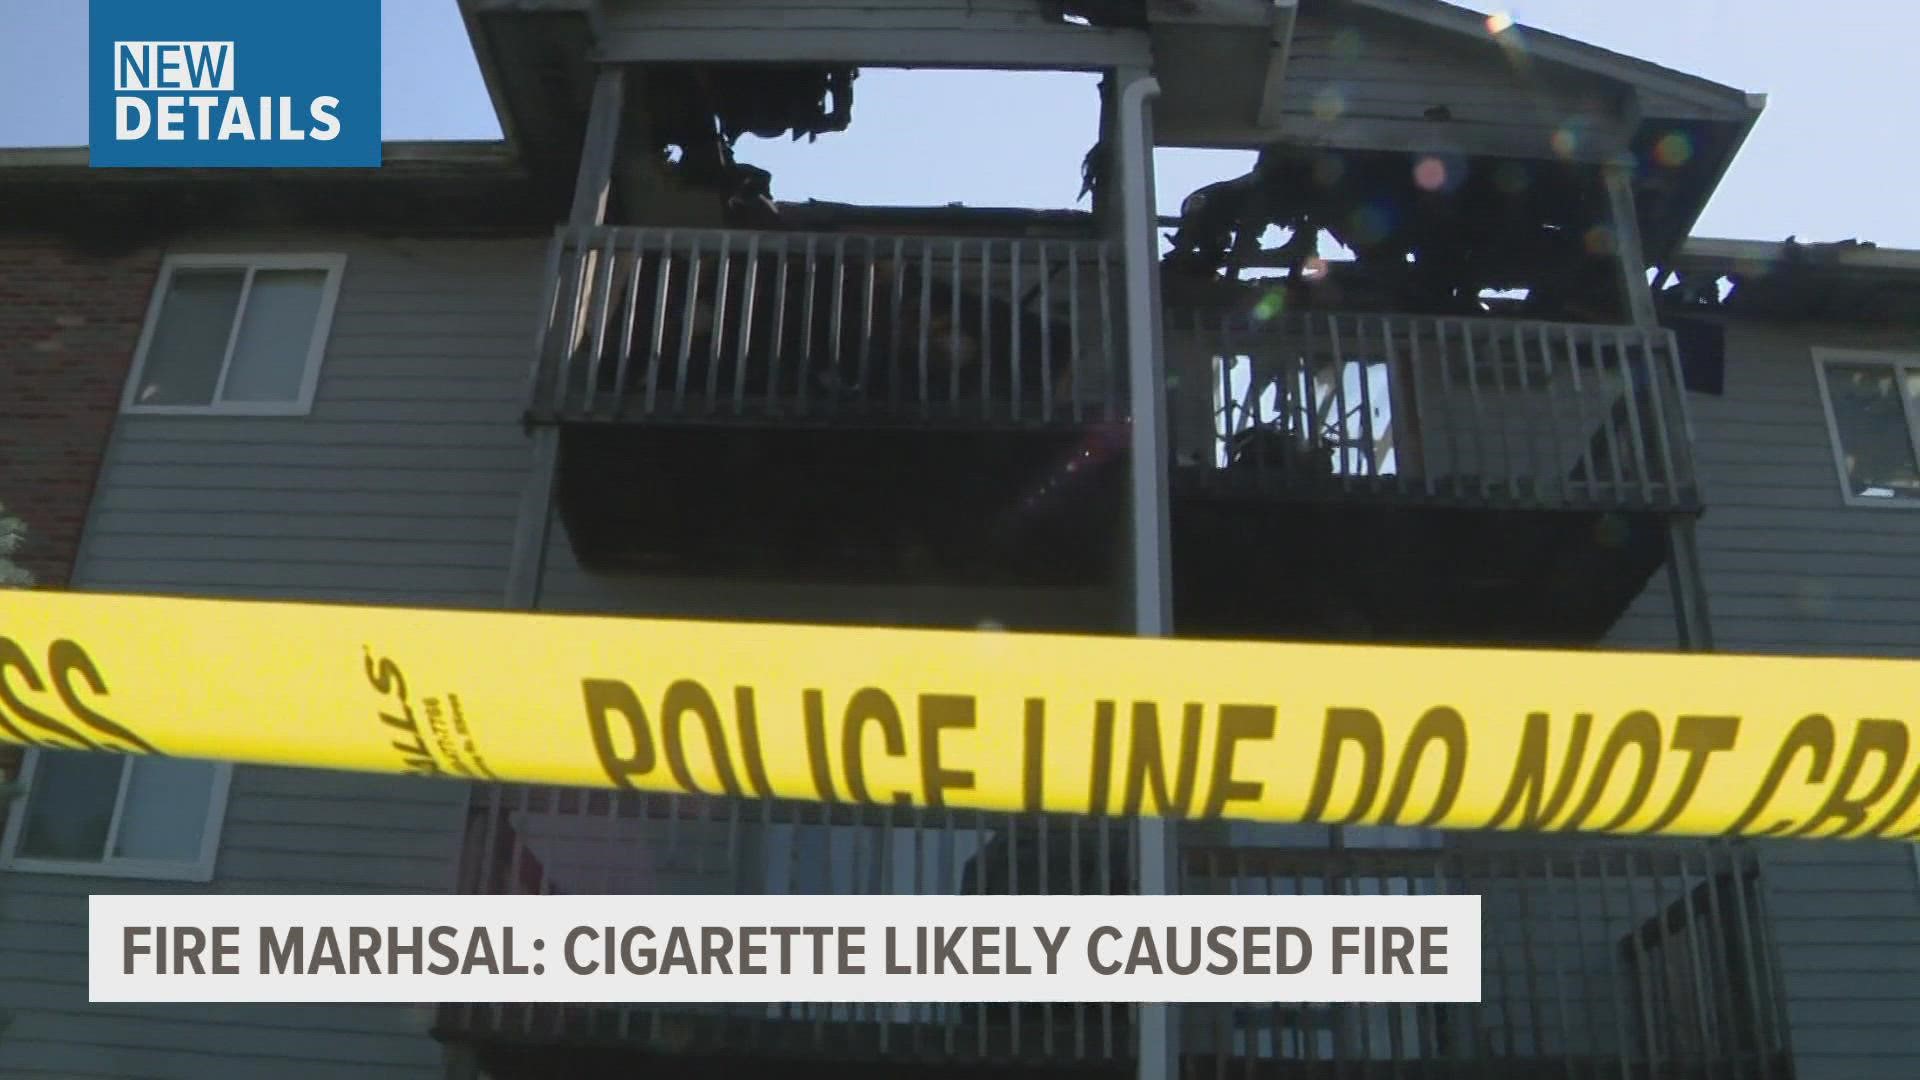 Fire Marshal Craig Fraser told Local 5 a resident had put out their cigarette on a deck before the wind shifted and likely sparked the fire.